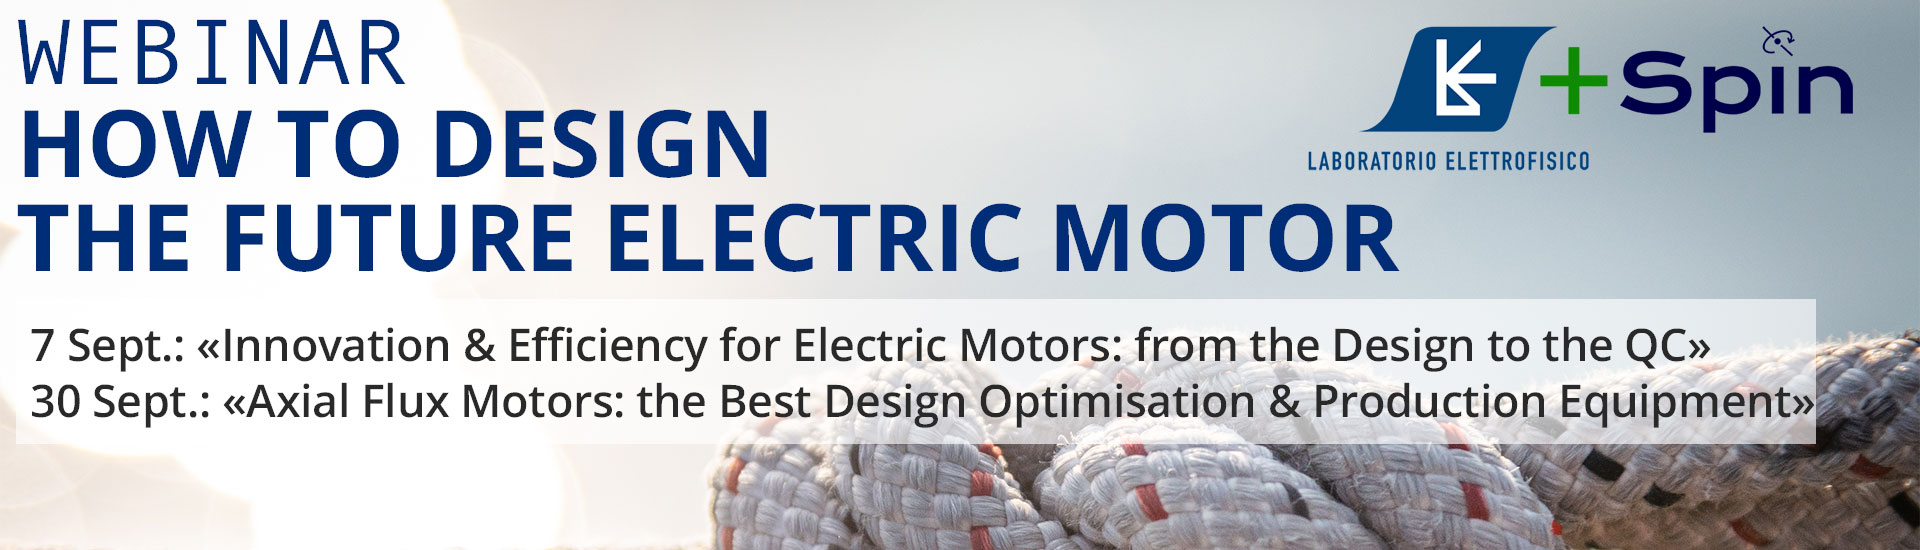 WEBINAR: "HOW TO DESIGN THE ELECTRIC MOTOR OF THE FUTURE"